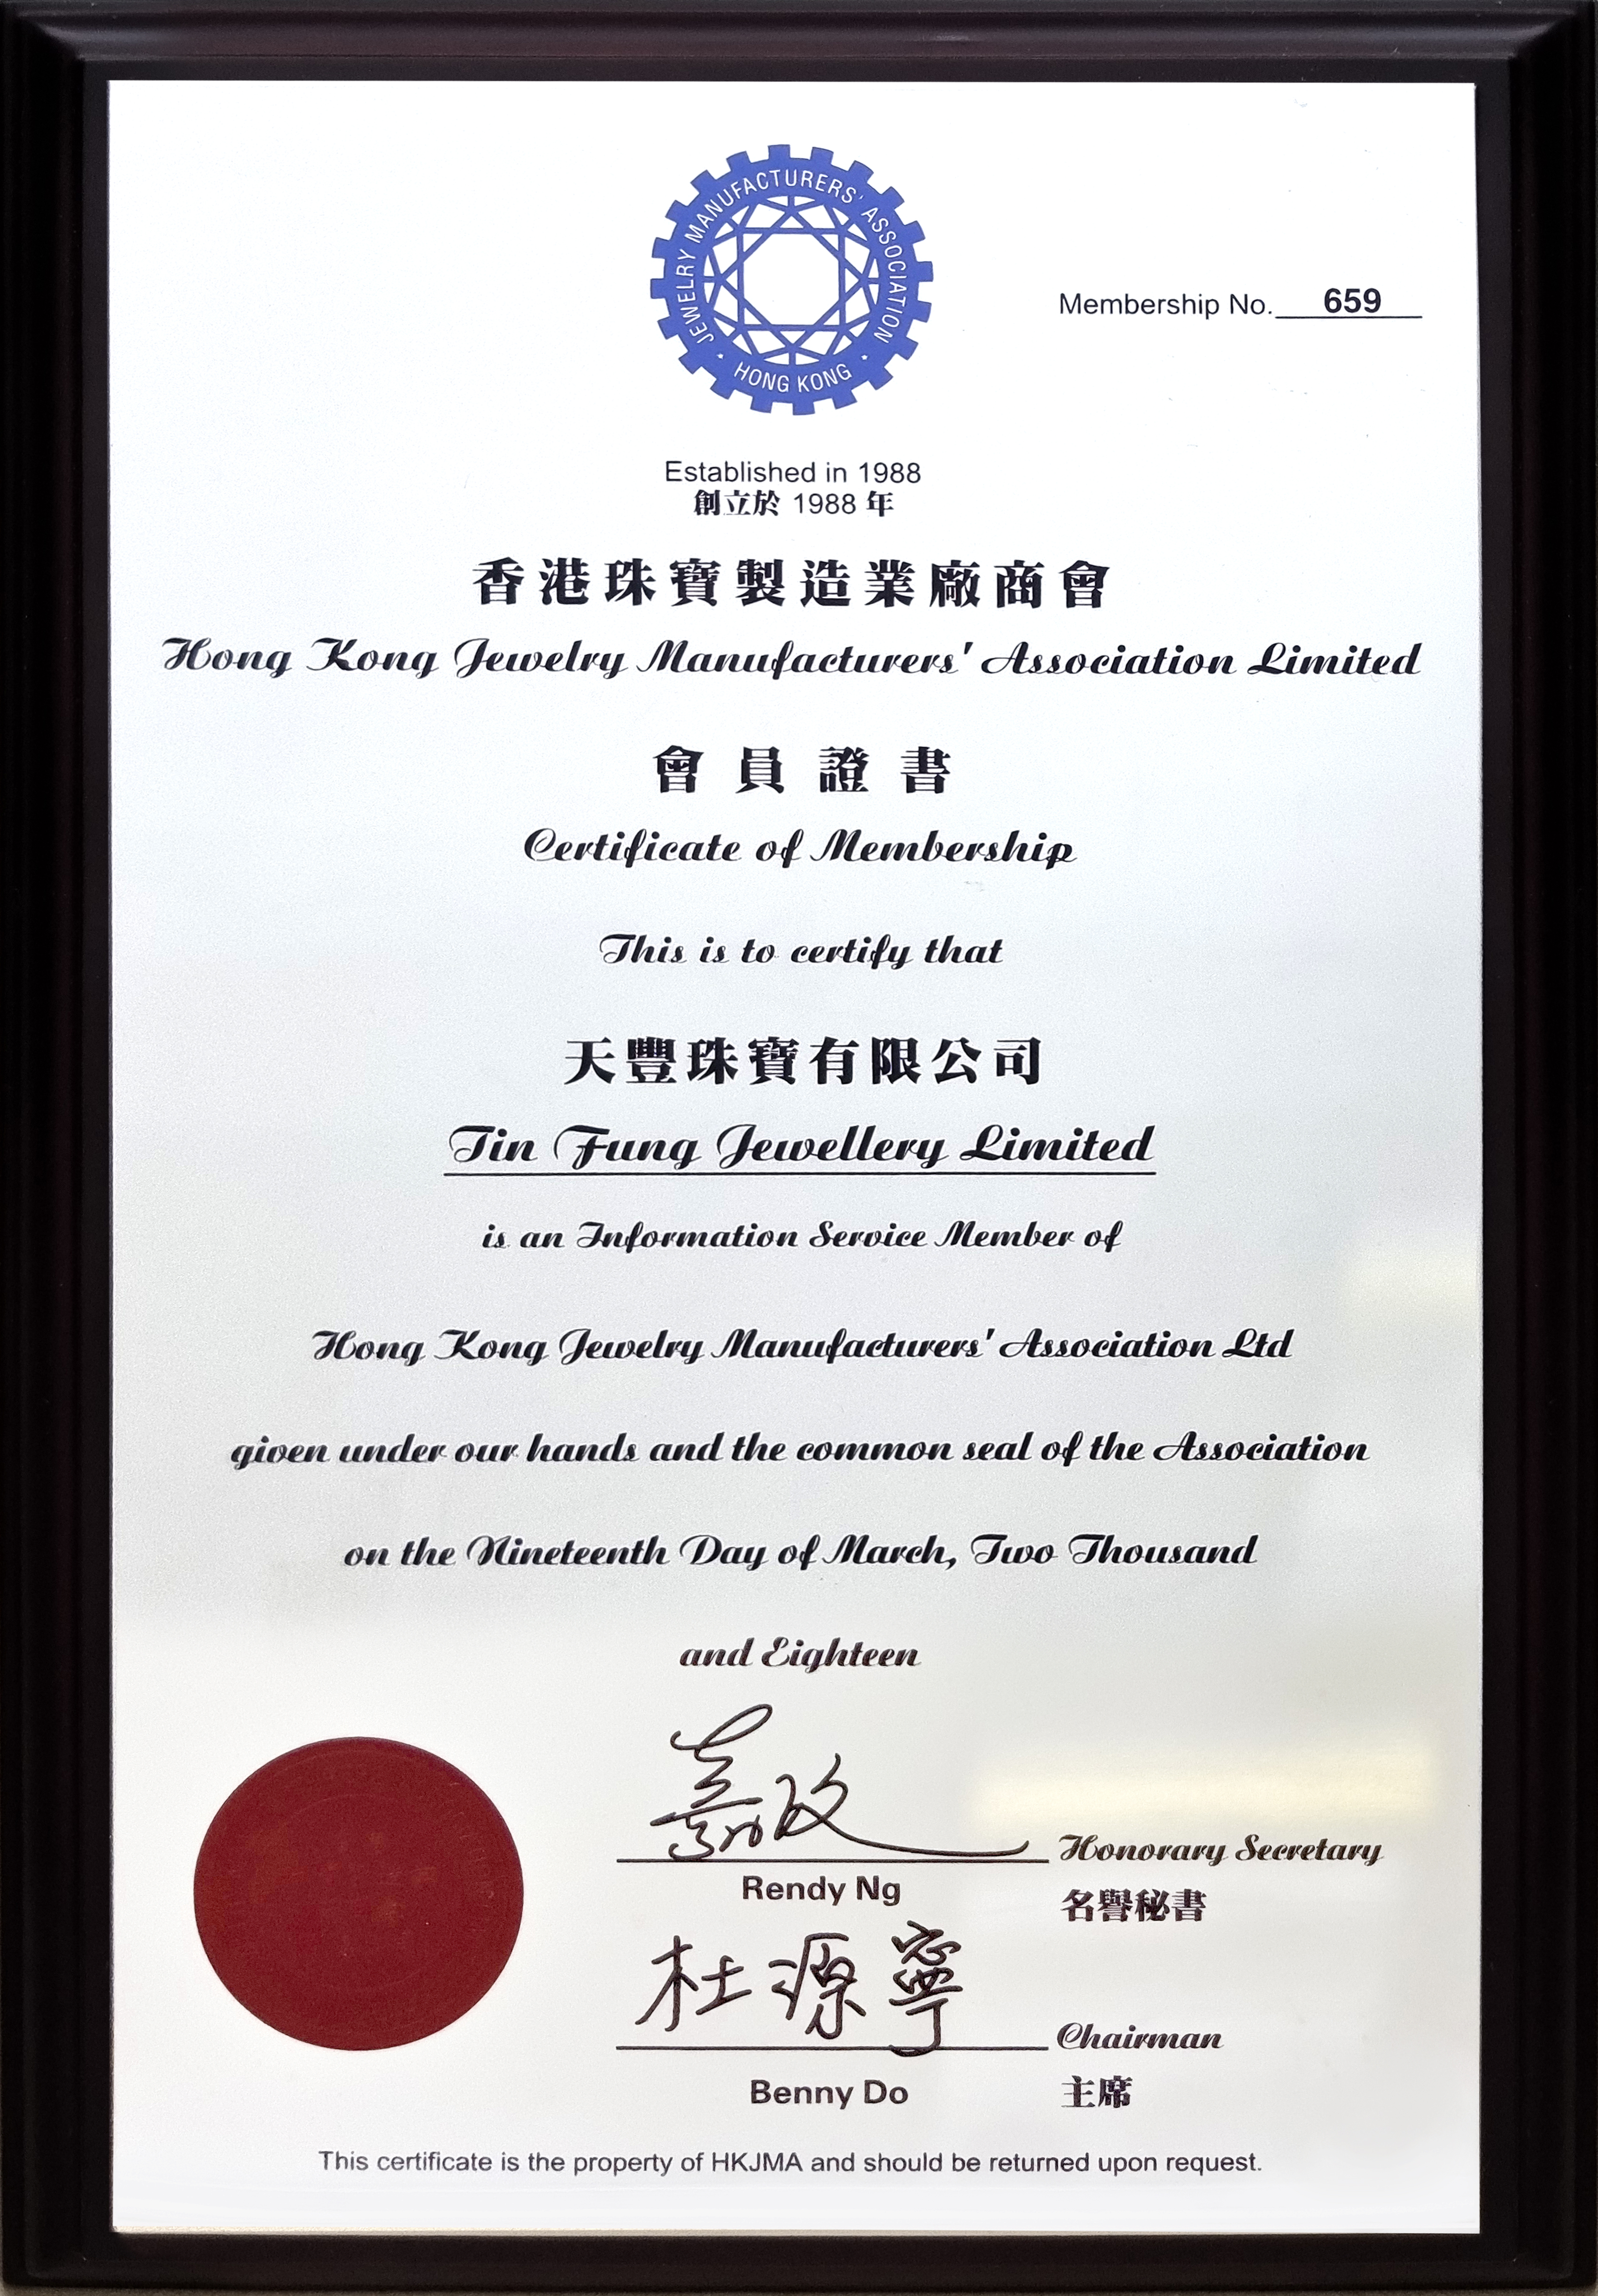 Hong Kong Jewelry Manufacturers' Association Limited Certificate of Membership